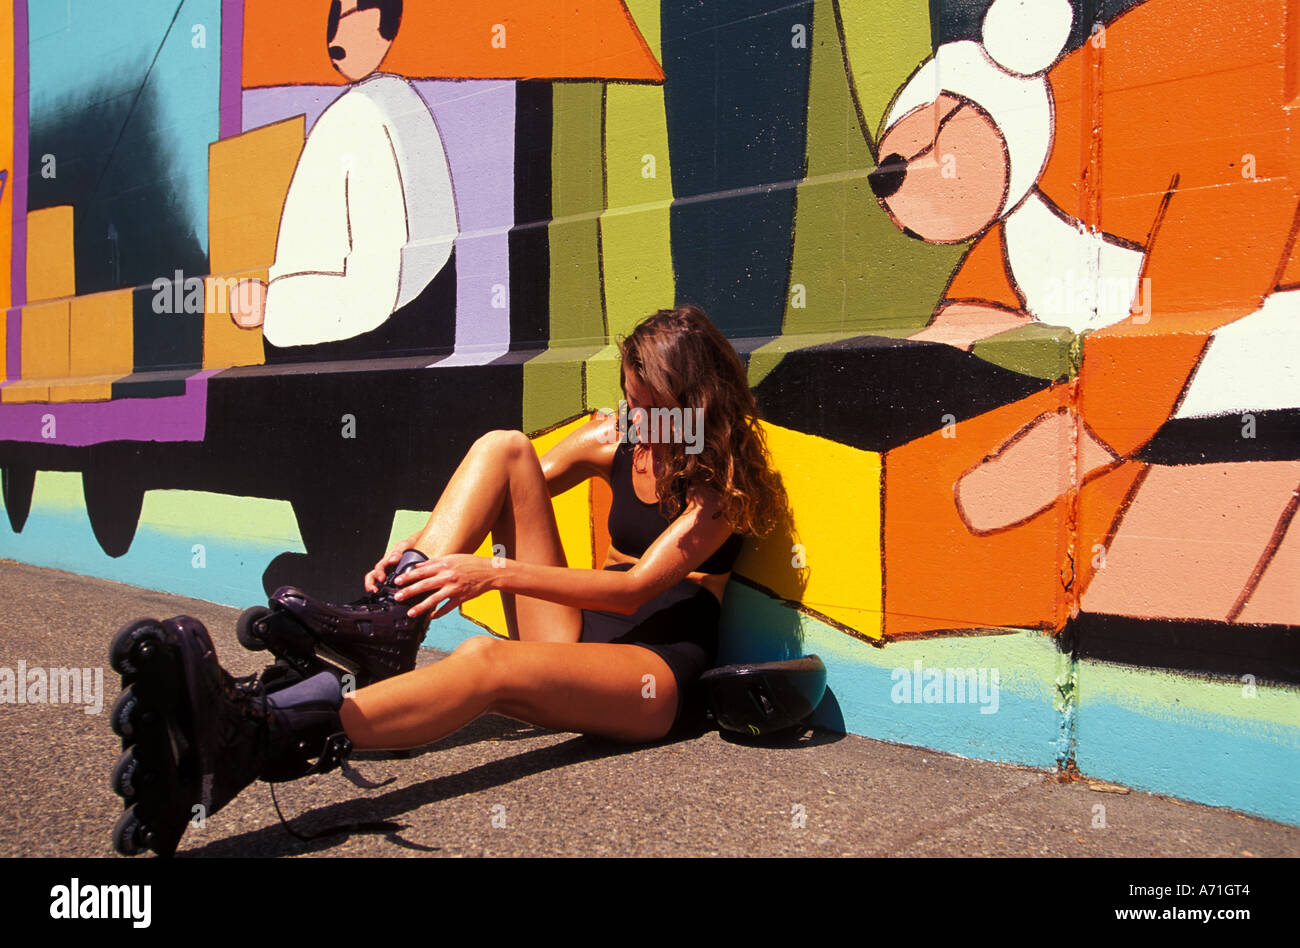 A young woman laces up her in line skates as she sits against against a colorfully painted mural Stock Photo